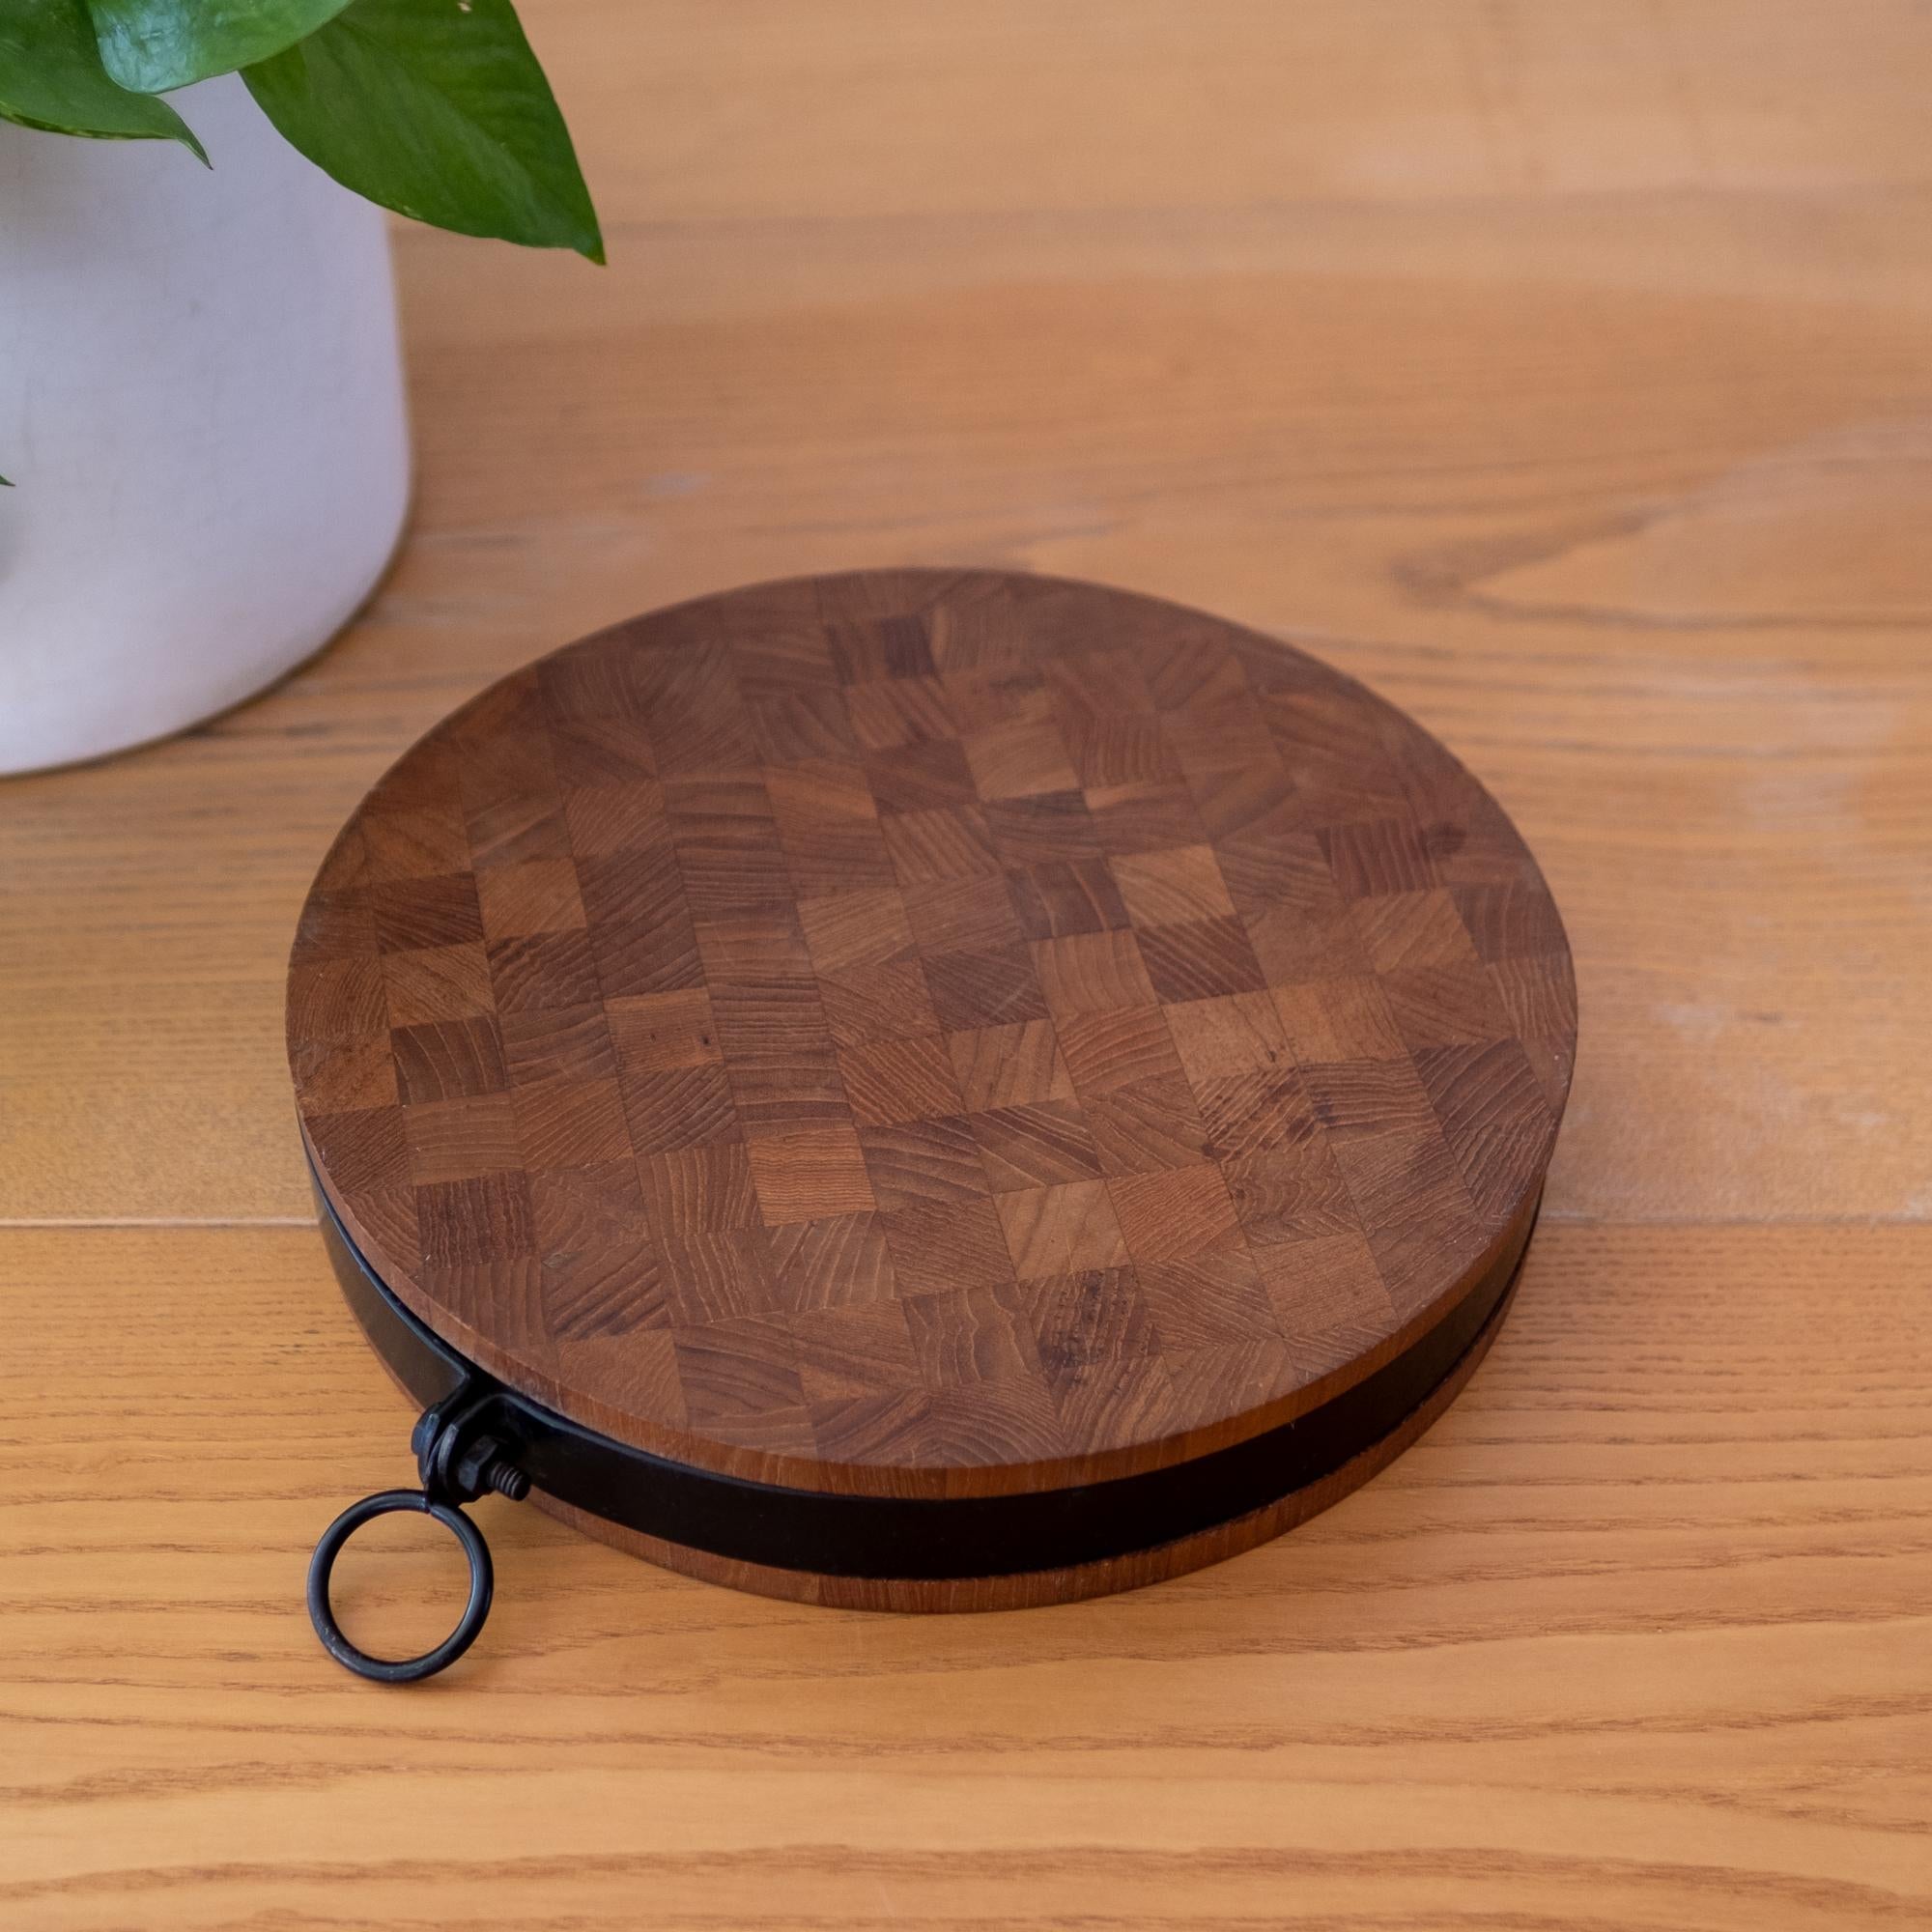 Teak hanging cutting board. Metal hoop and band around a thick dual sided teak butcher block board. Denmark, 1960s.